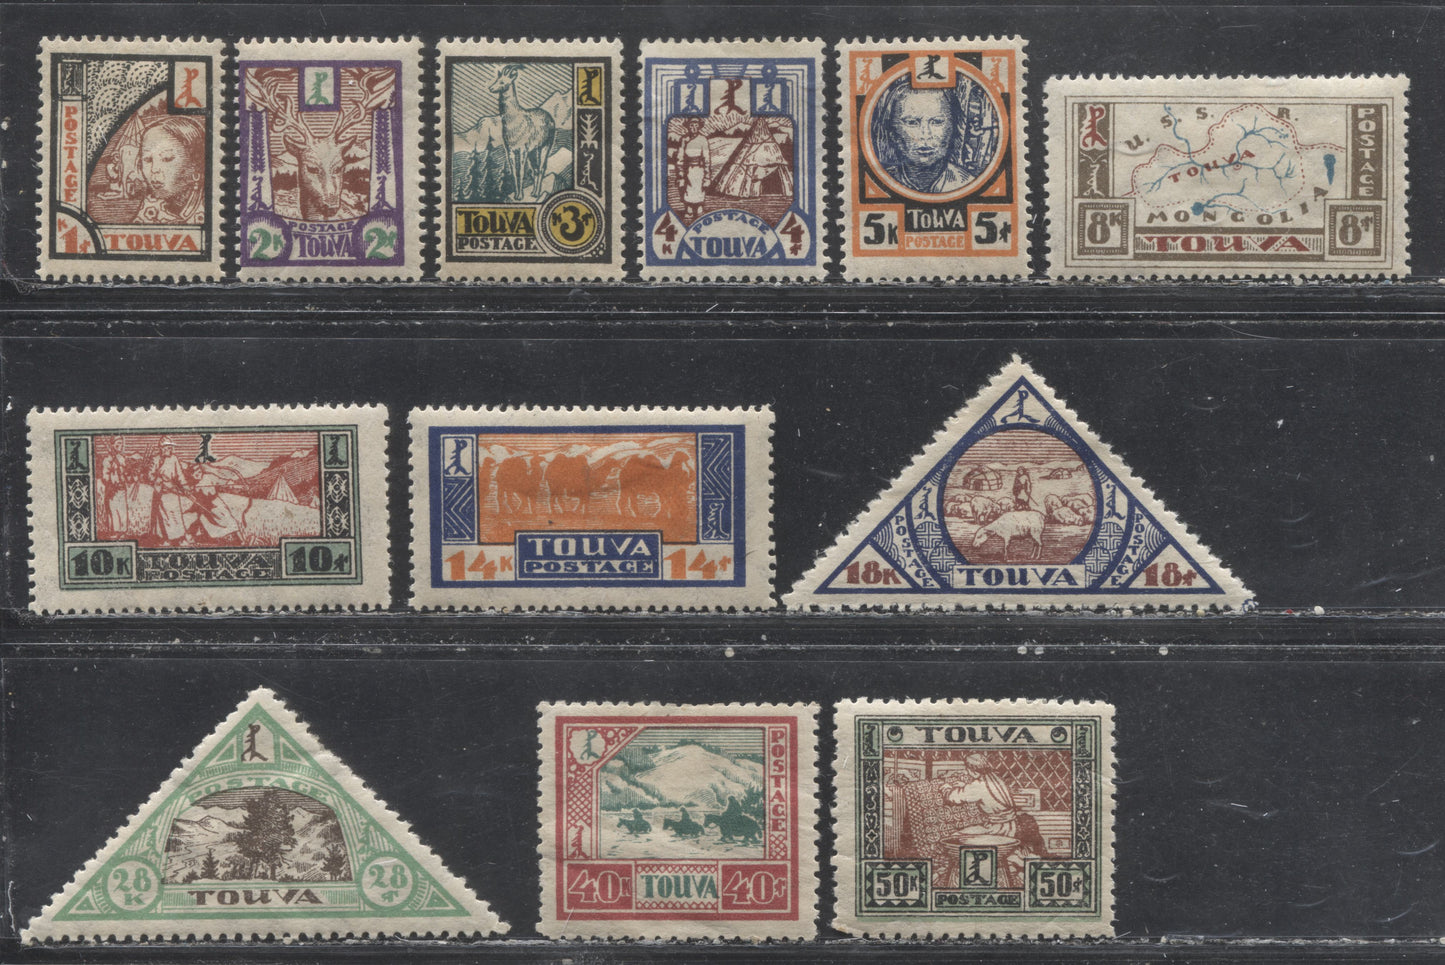 Lot 99 Tannu Tuva #15/28 1927 Pictorial Issue, A Nearly Complete F-VF Mint OG Set, All Original